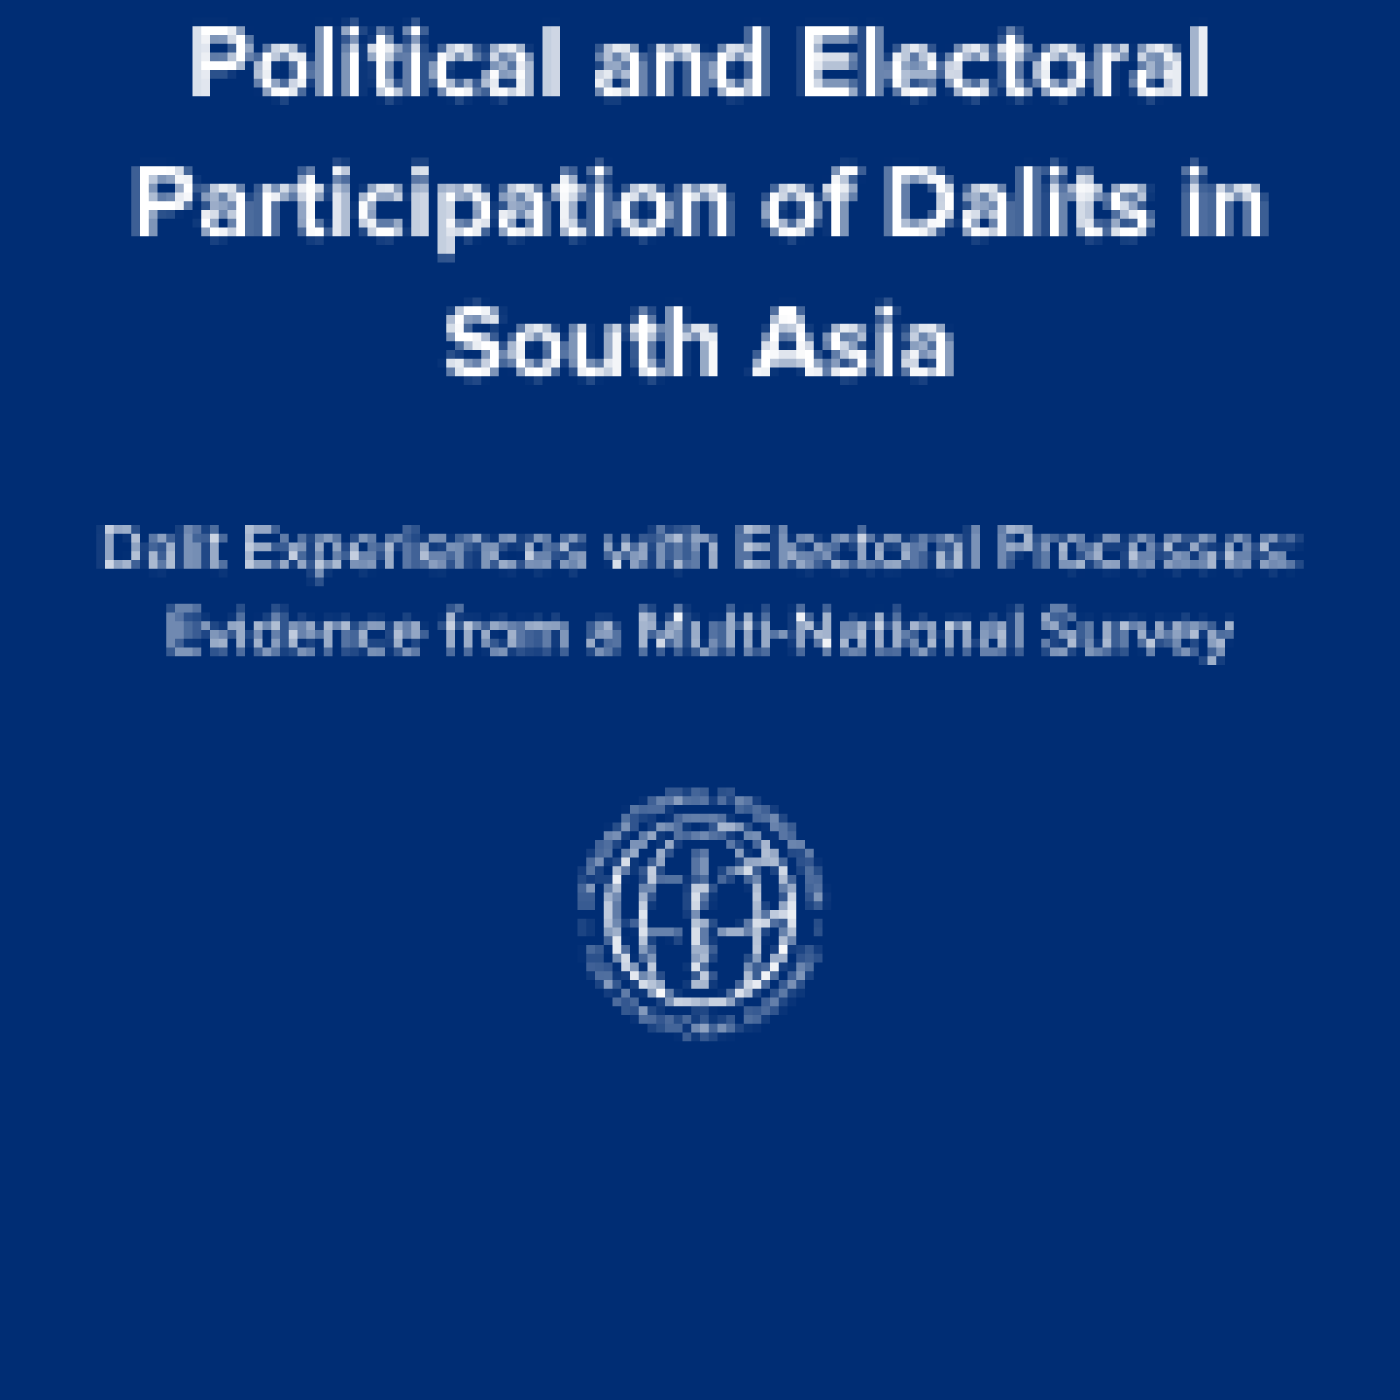 Political and Electoral Participation of Dalits in South Asia: Dalit Experiences with Electoral Processes: Evidence from a Multi-National Survey